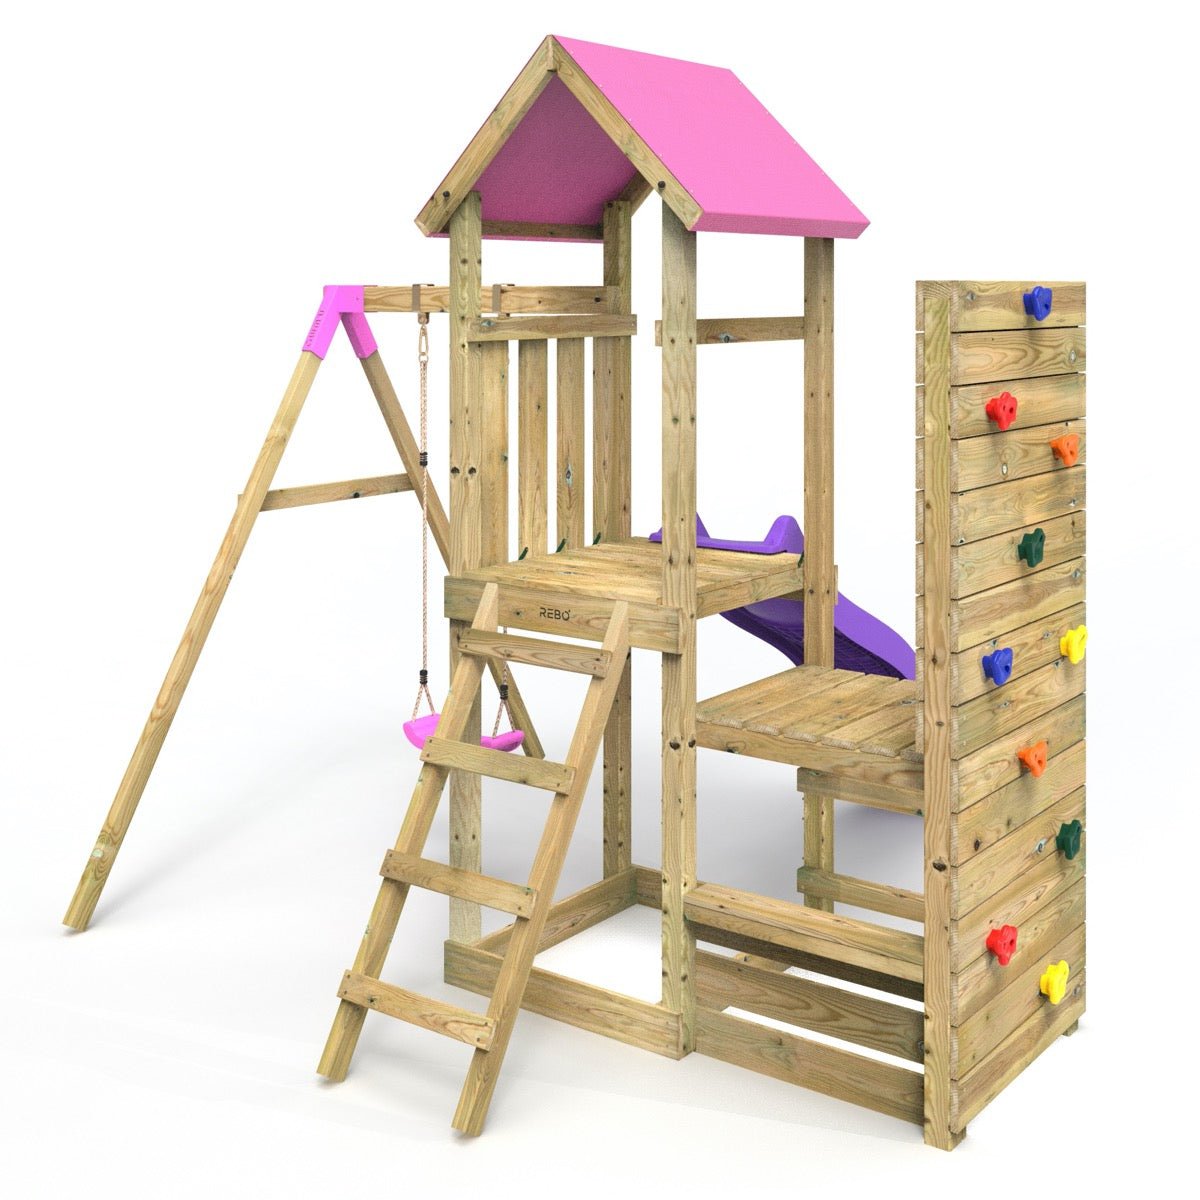 Rebo Wooden Climbing Frame with Vertical Rock Wall, Swing Set and Slide - Rushmore+ Pink